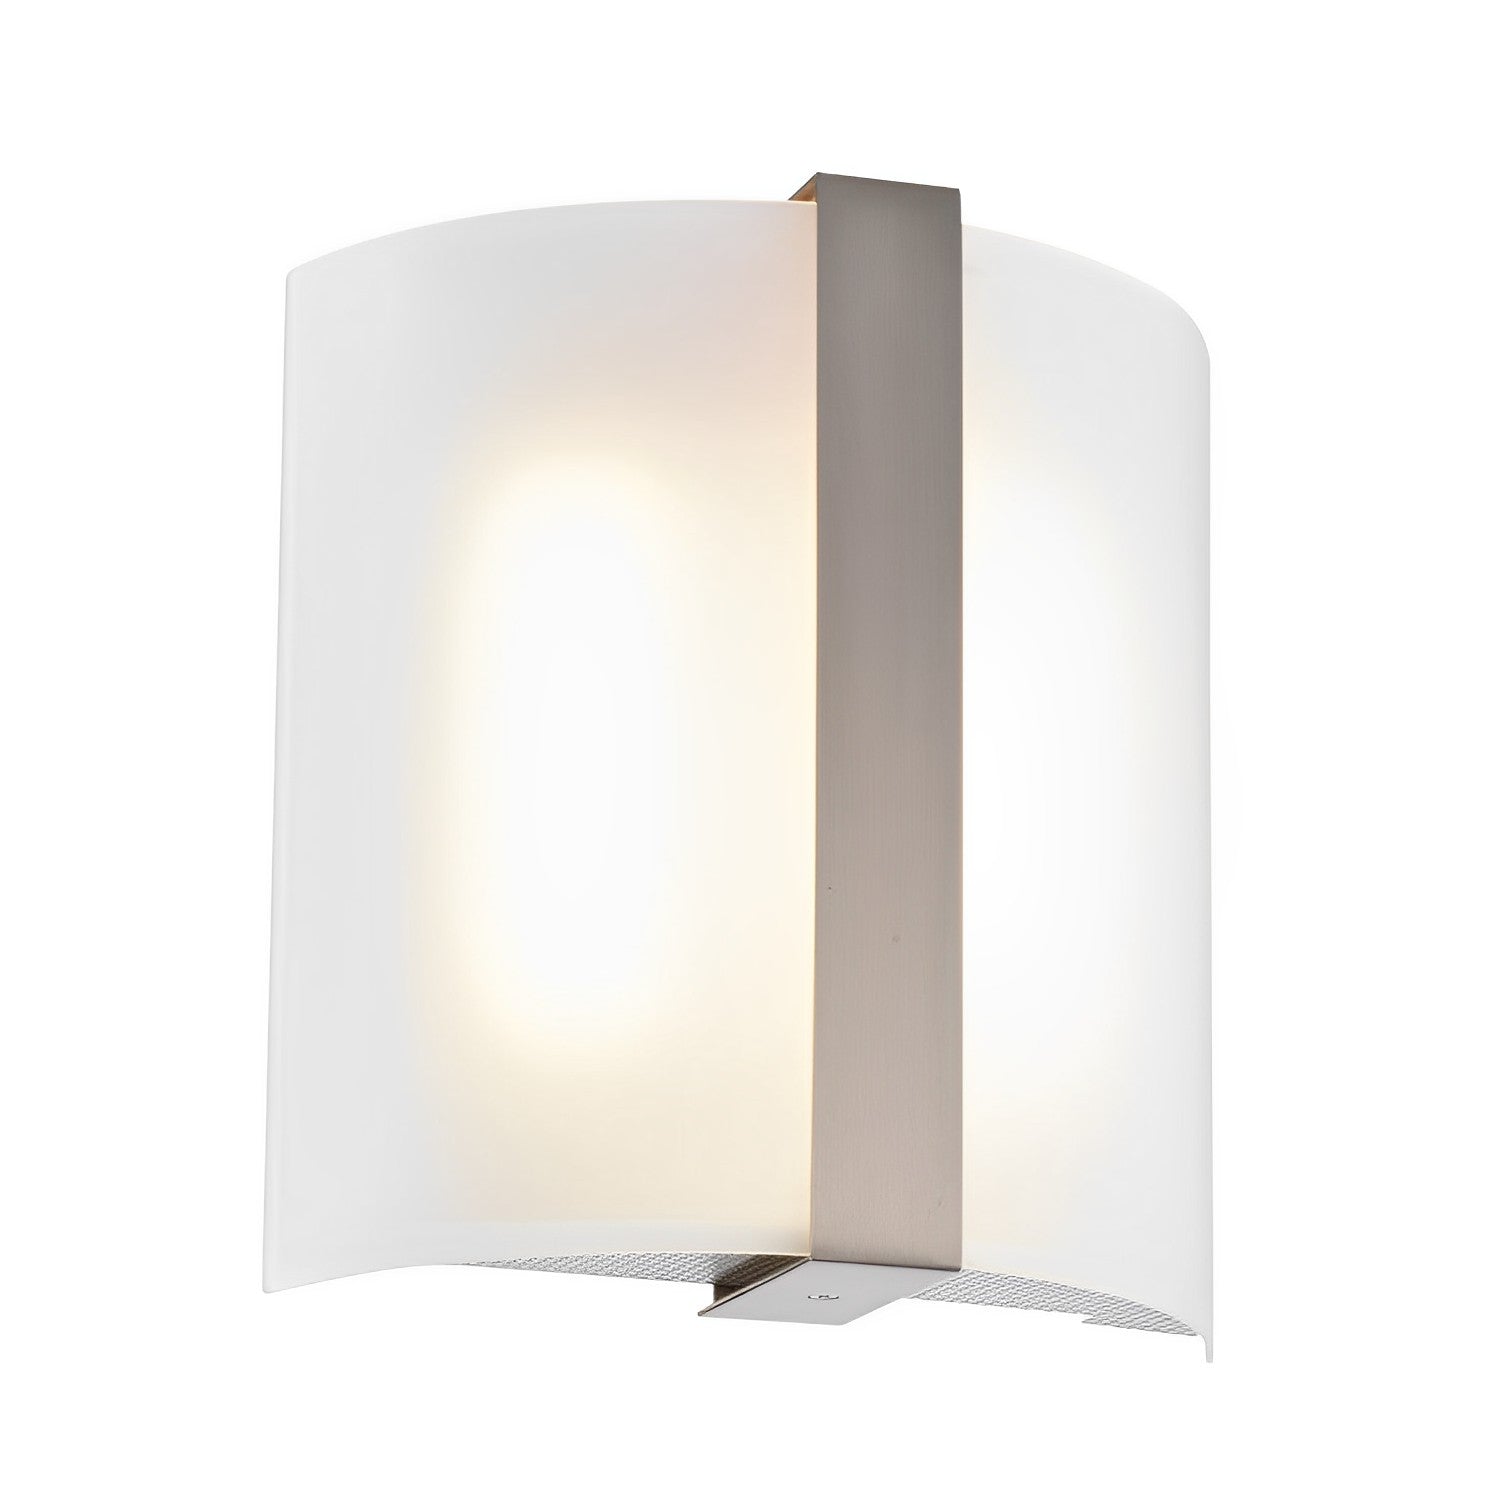 Image of living room light fixture or vanity sconce